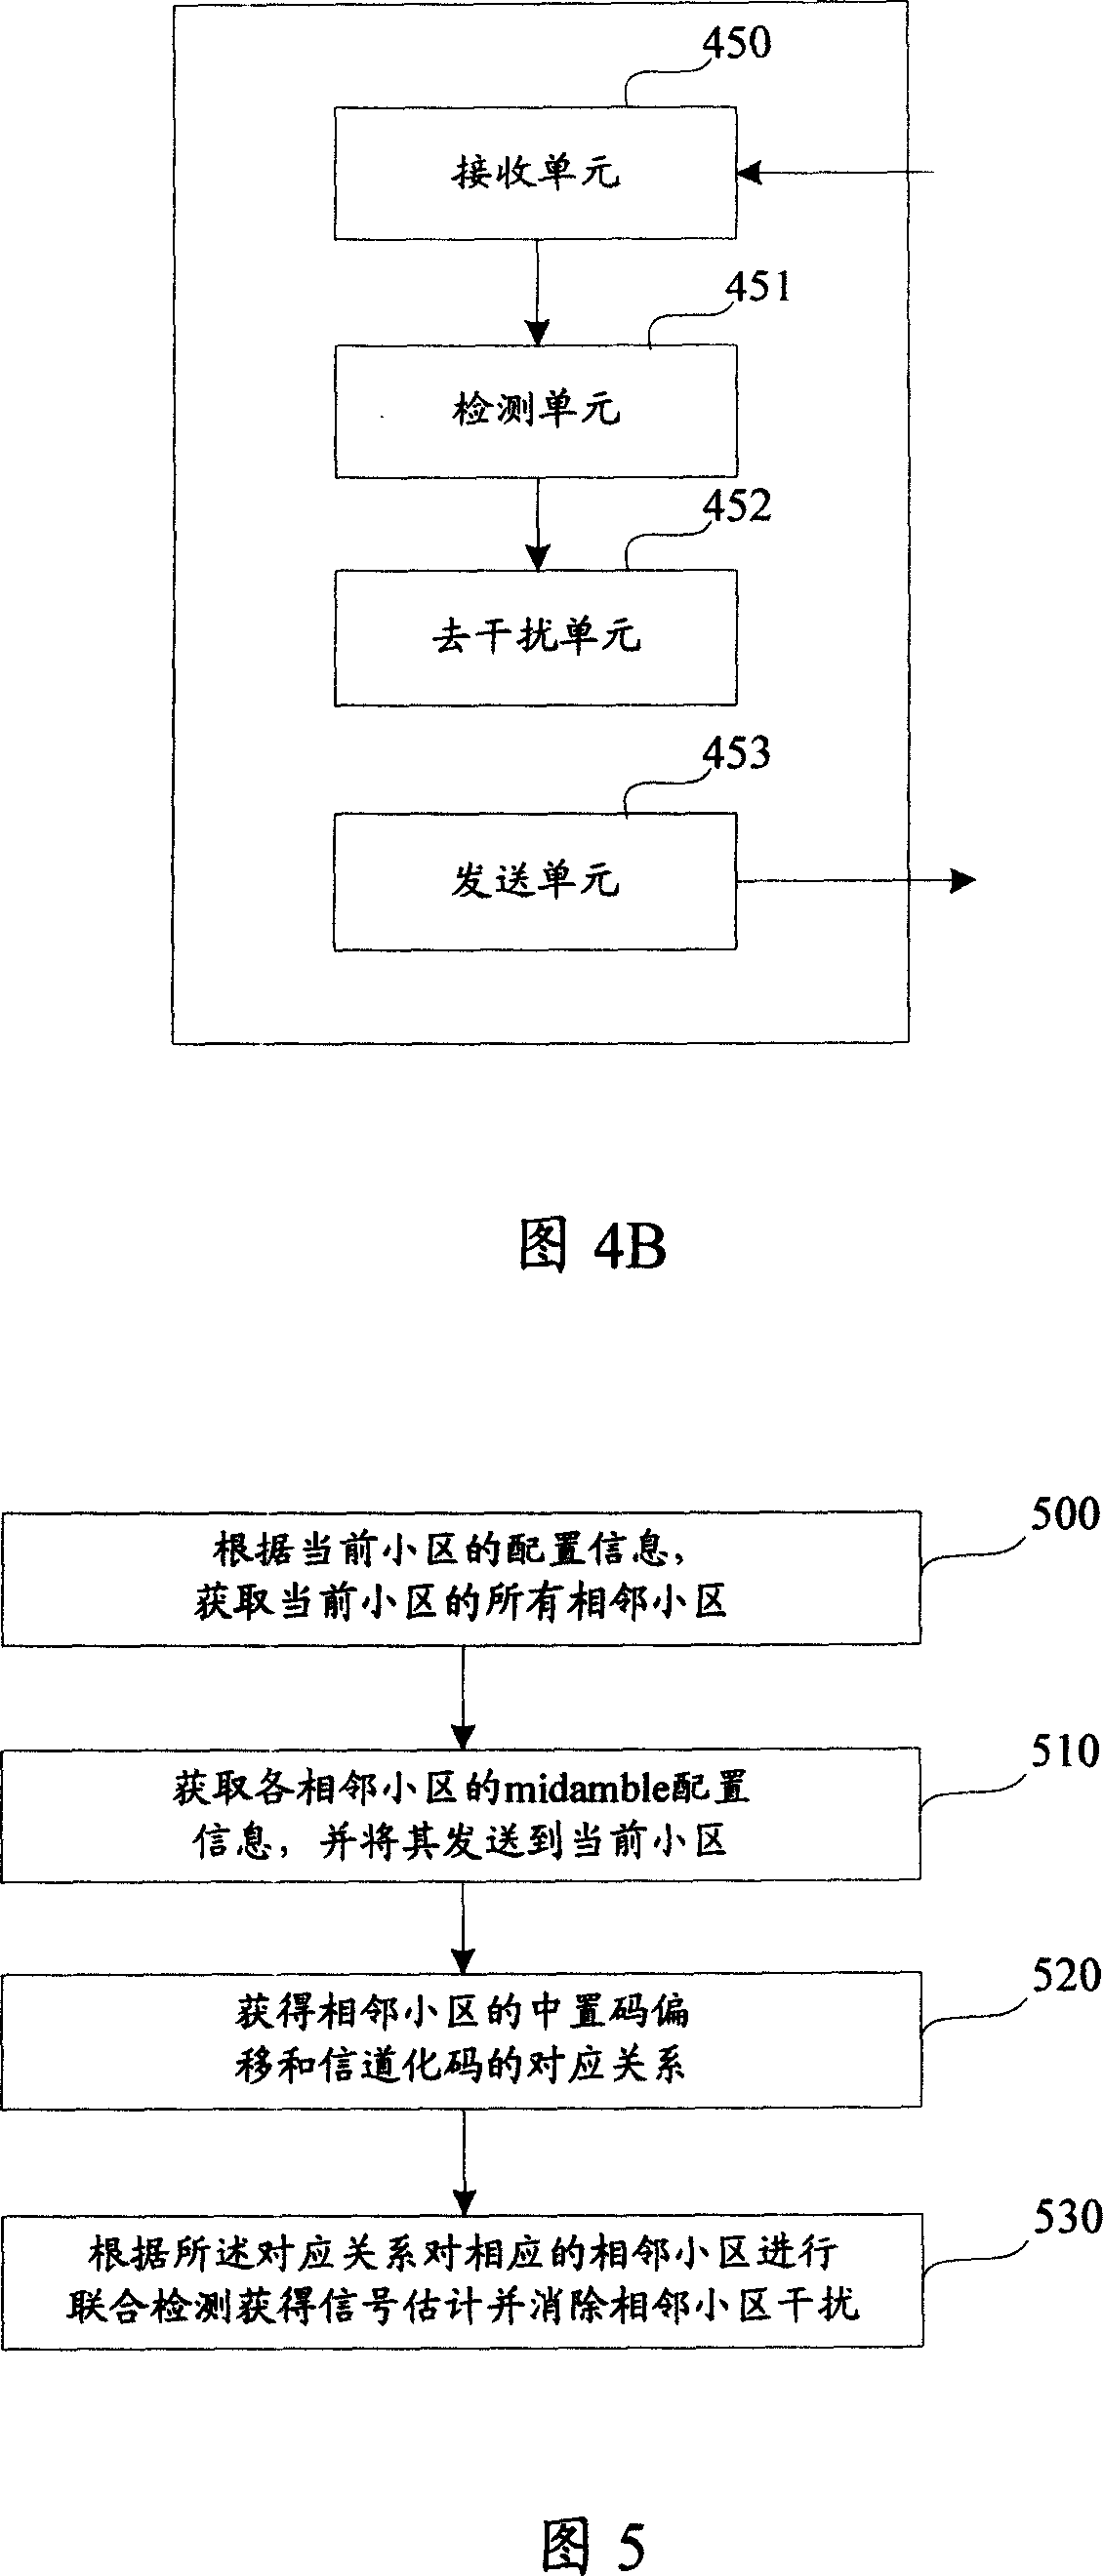 Method and apparatus for eliminating interference between adjacent cells